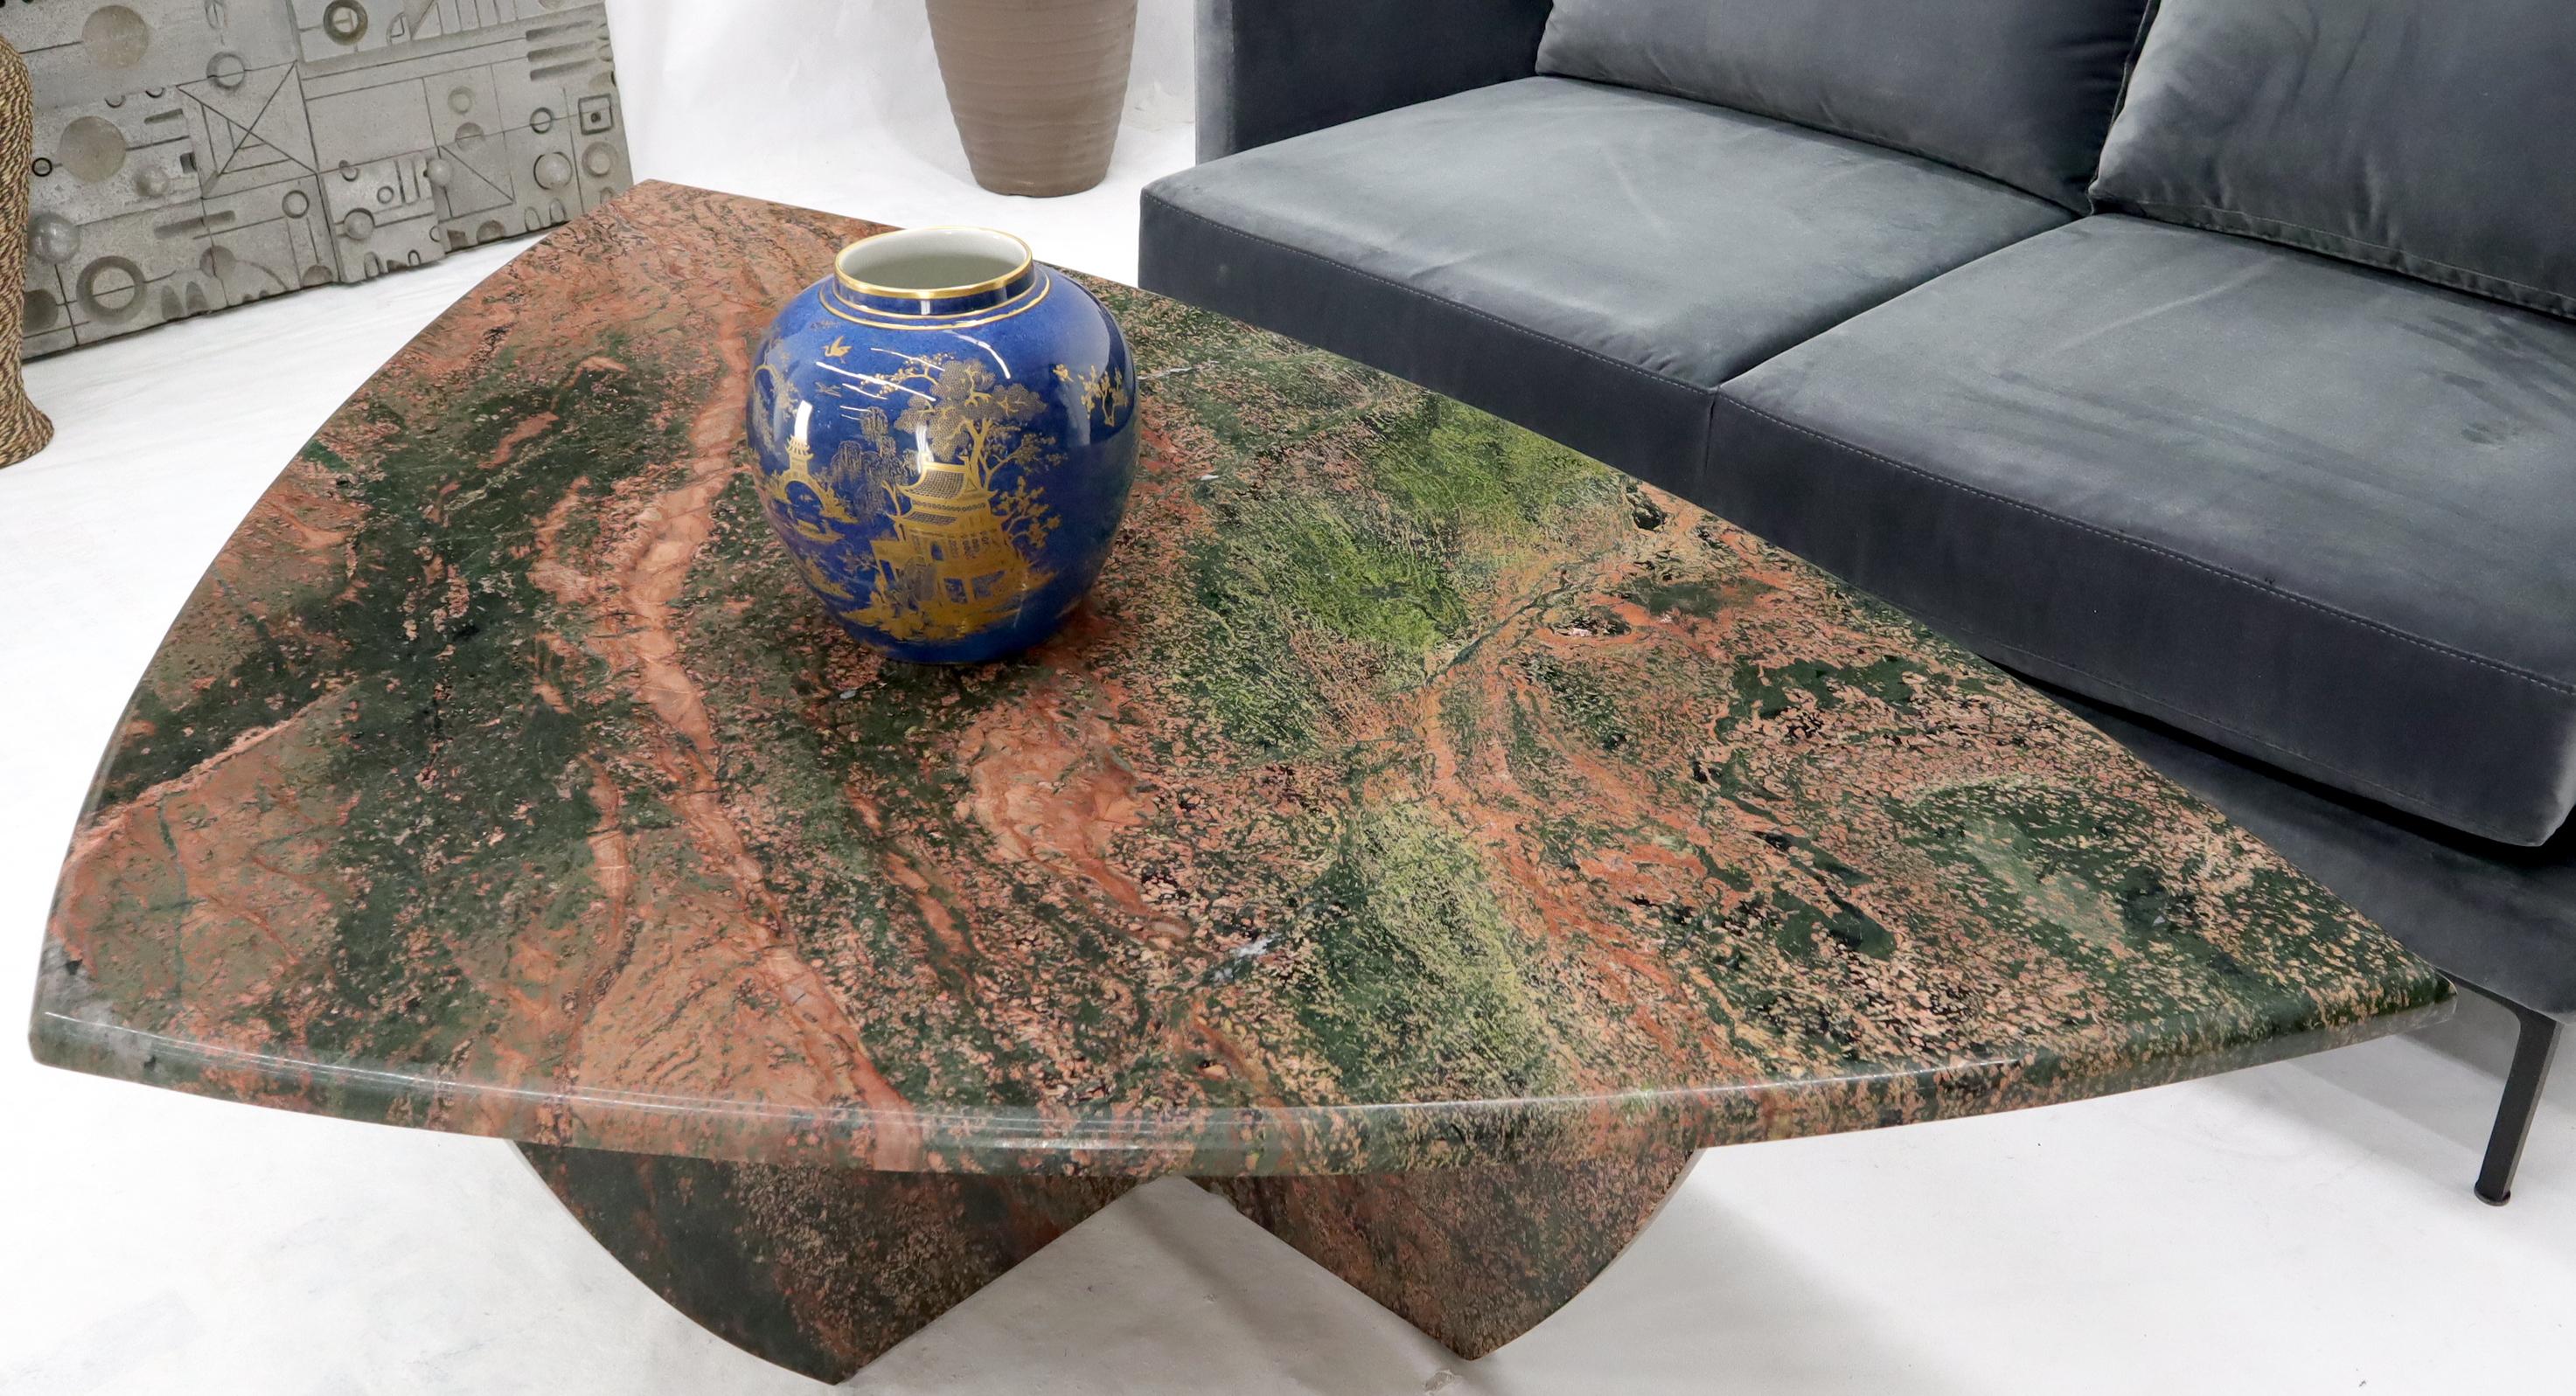 Rounded Triangle Shape Large Solid Marble Coffee Table In Excellent Condition For Sale In Rockaway, NJ